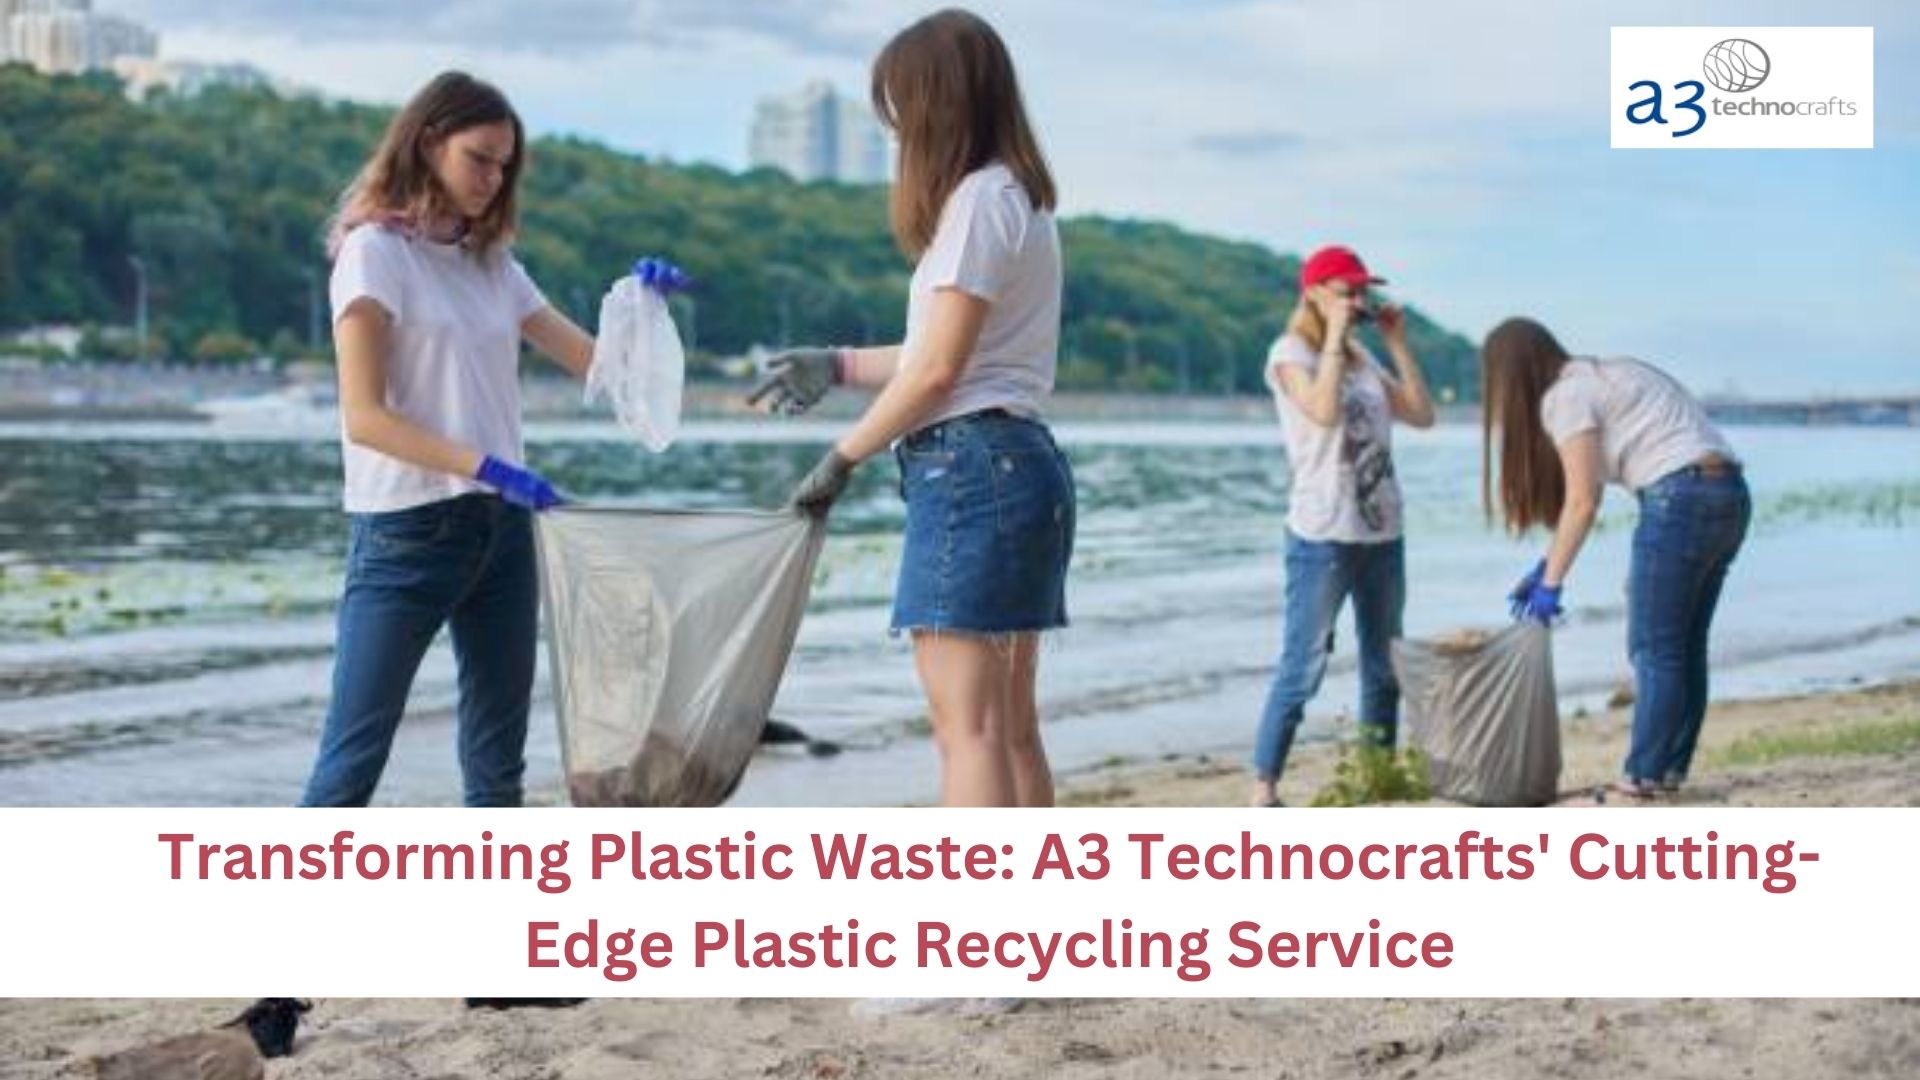 Transforming Plastic Waste: A3 Technocrafts’ Cutting-Edge Plastic Recycling Service